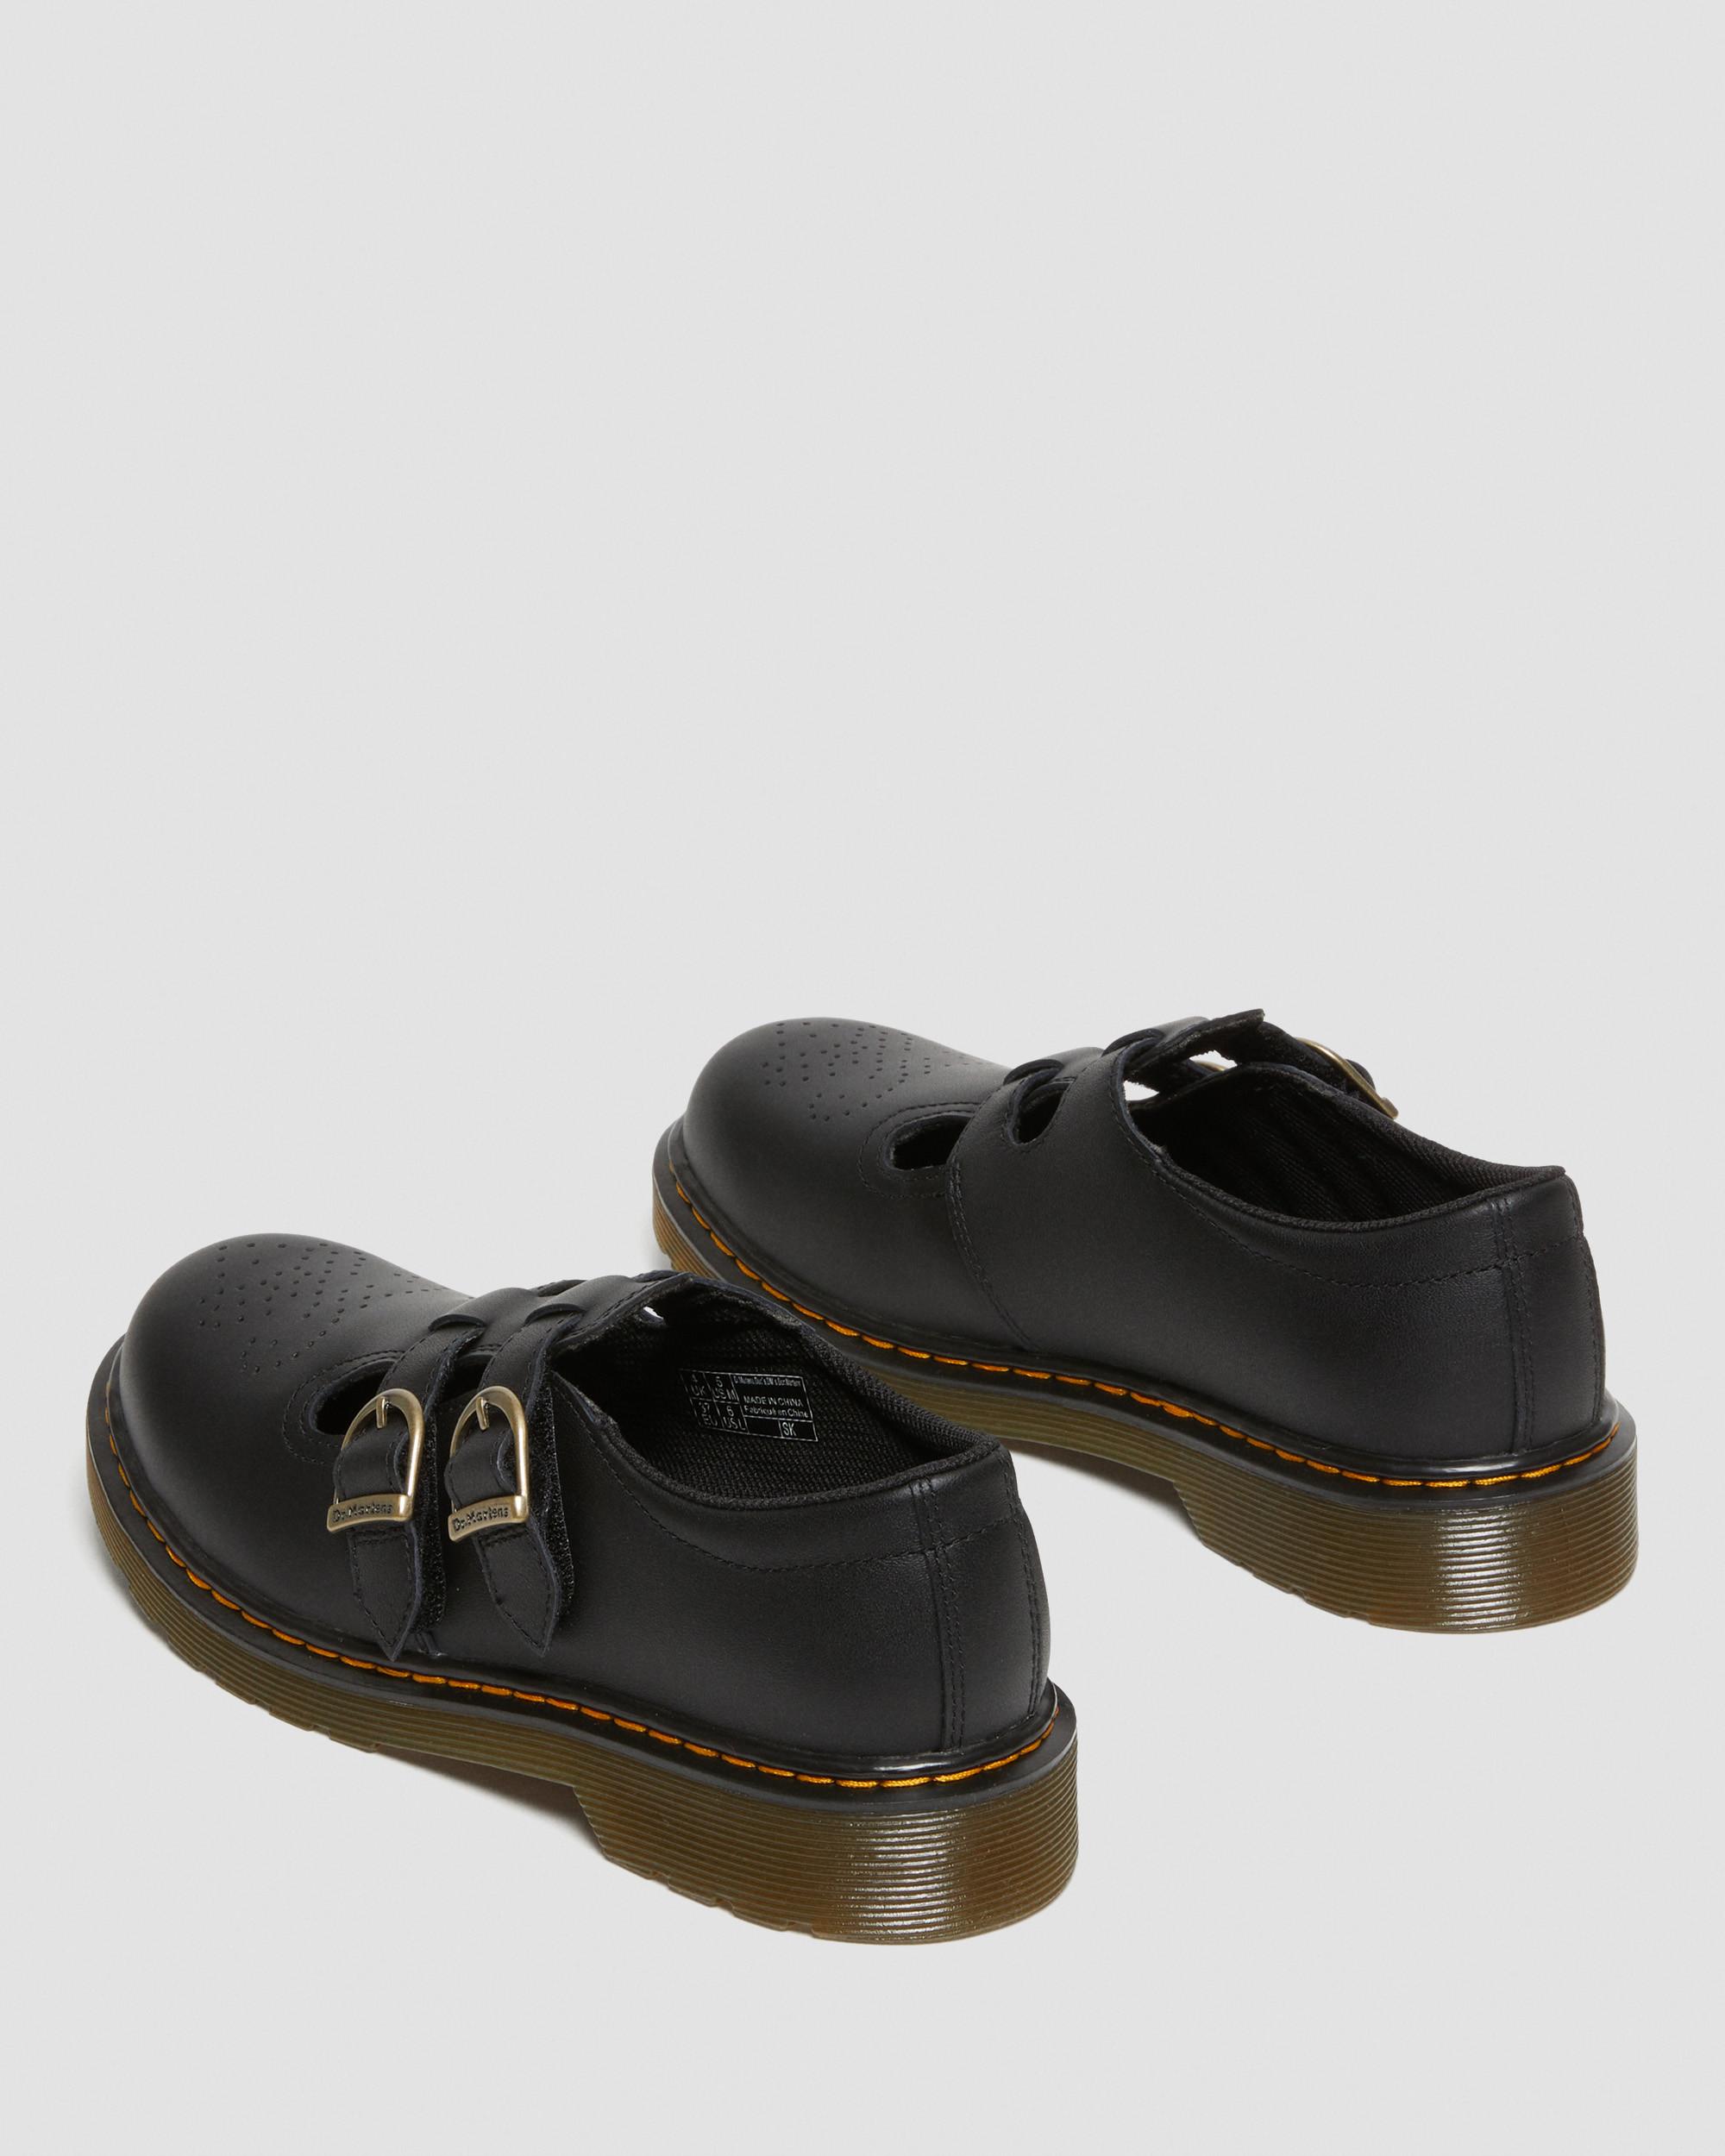 Youth 8065 Softy T Leather Mary Jane Shoes in Black